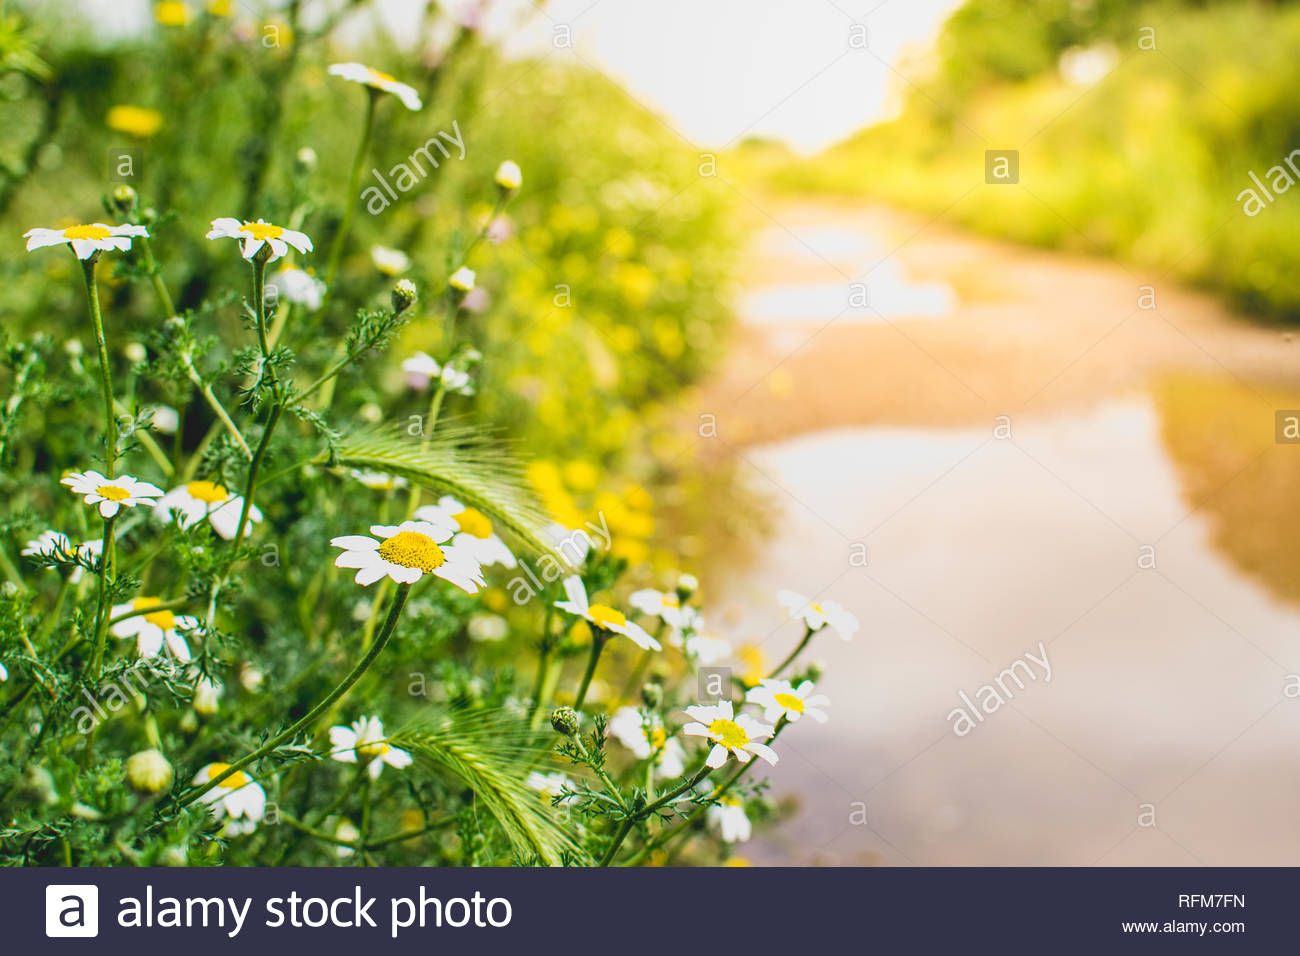 Daisy flowers by a path at sunset Springtime background Relaxing